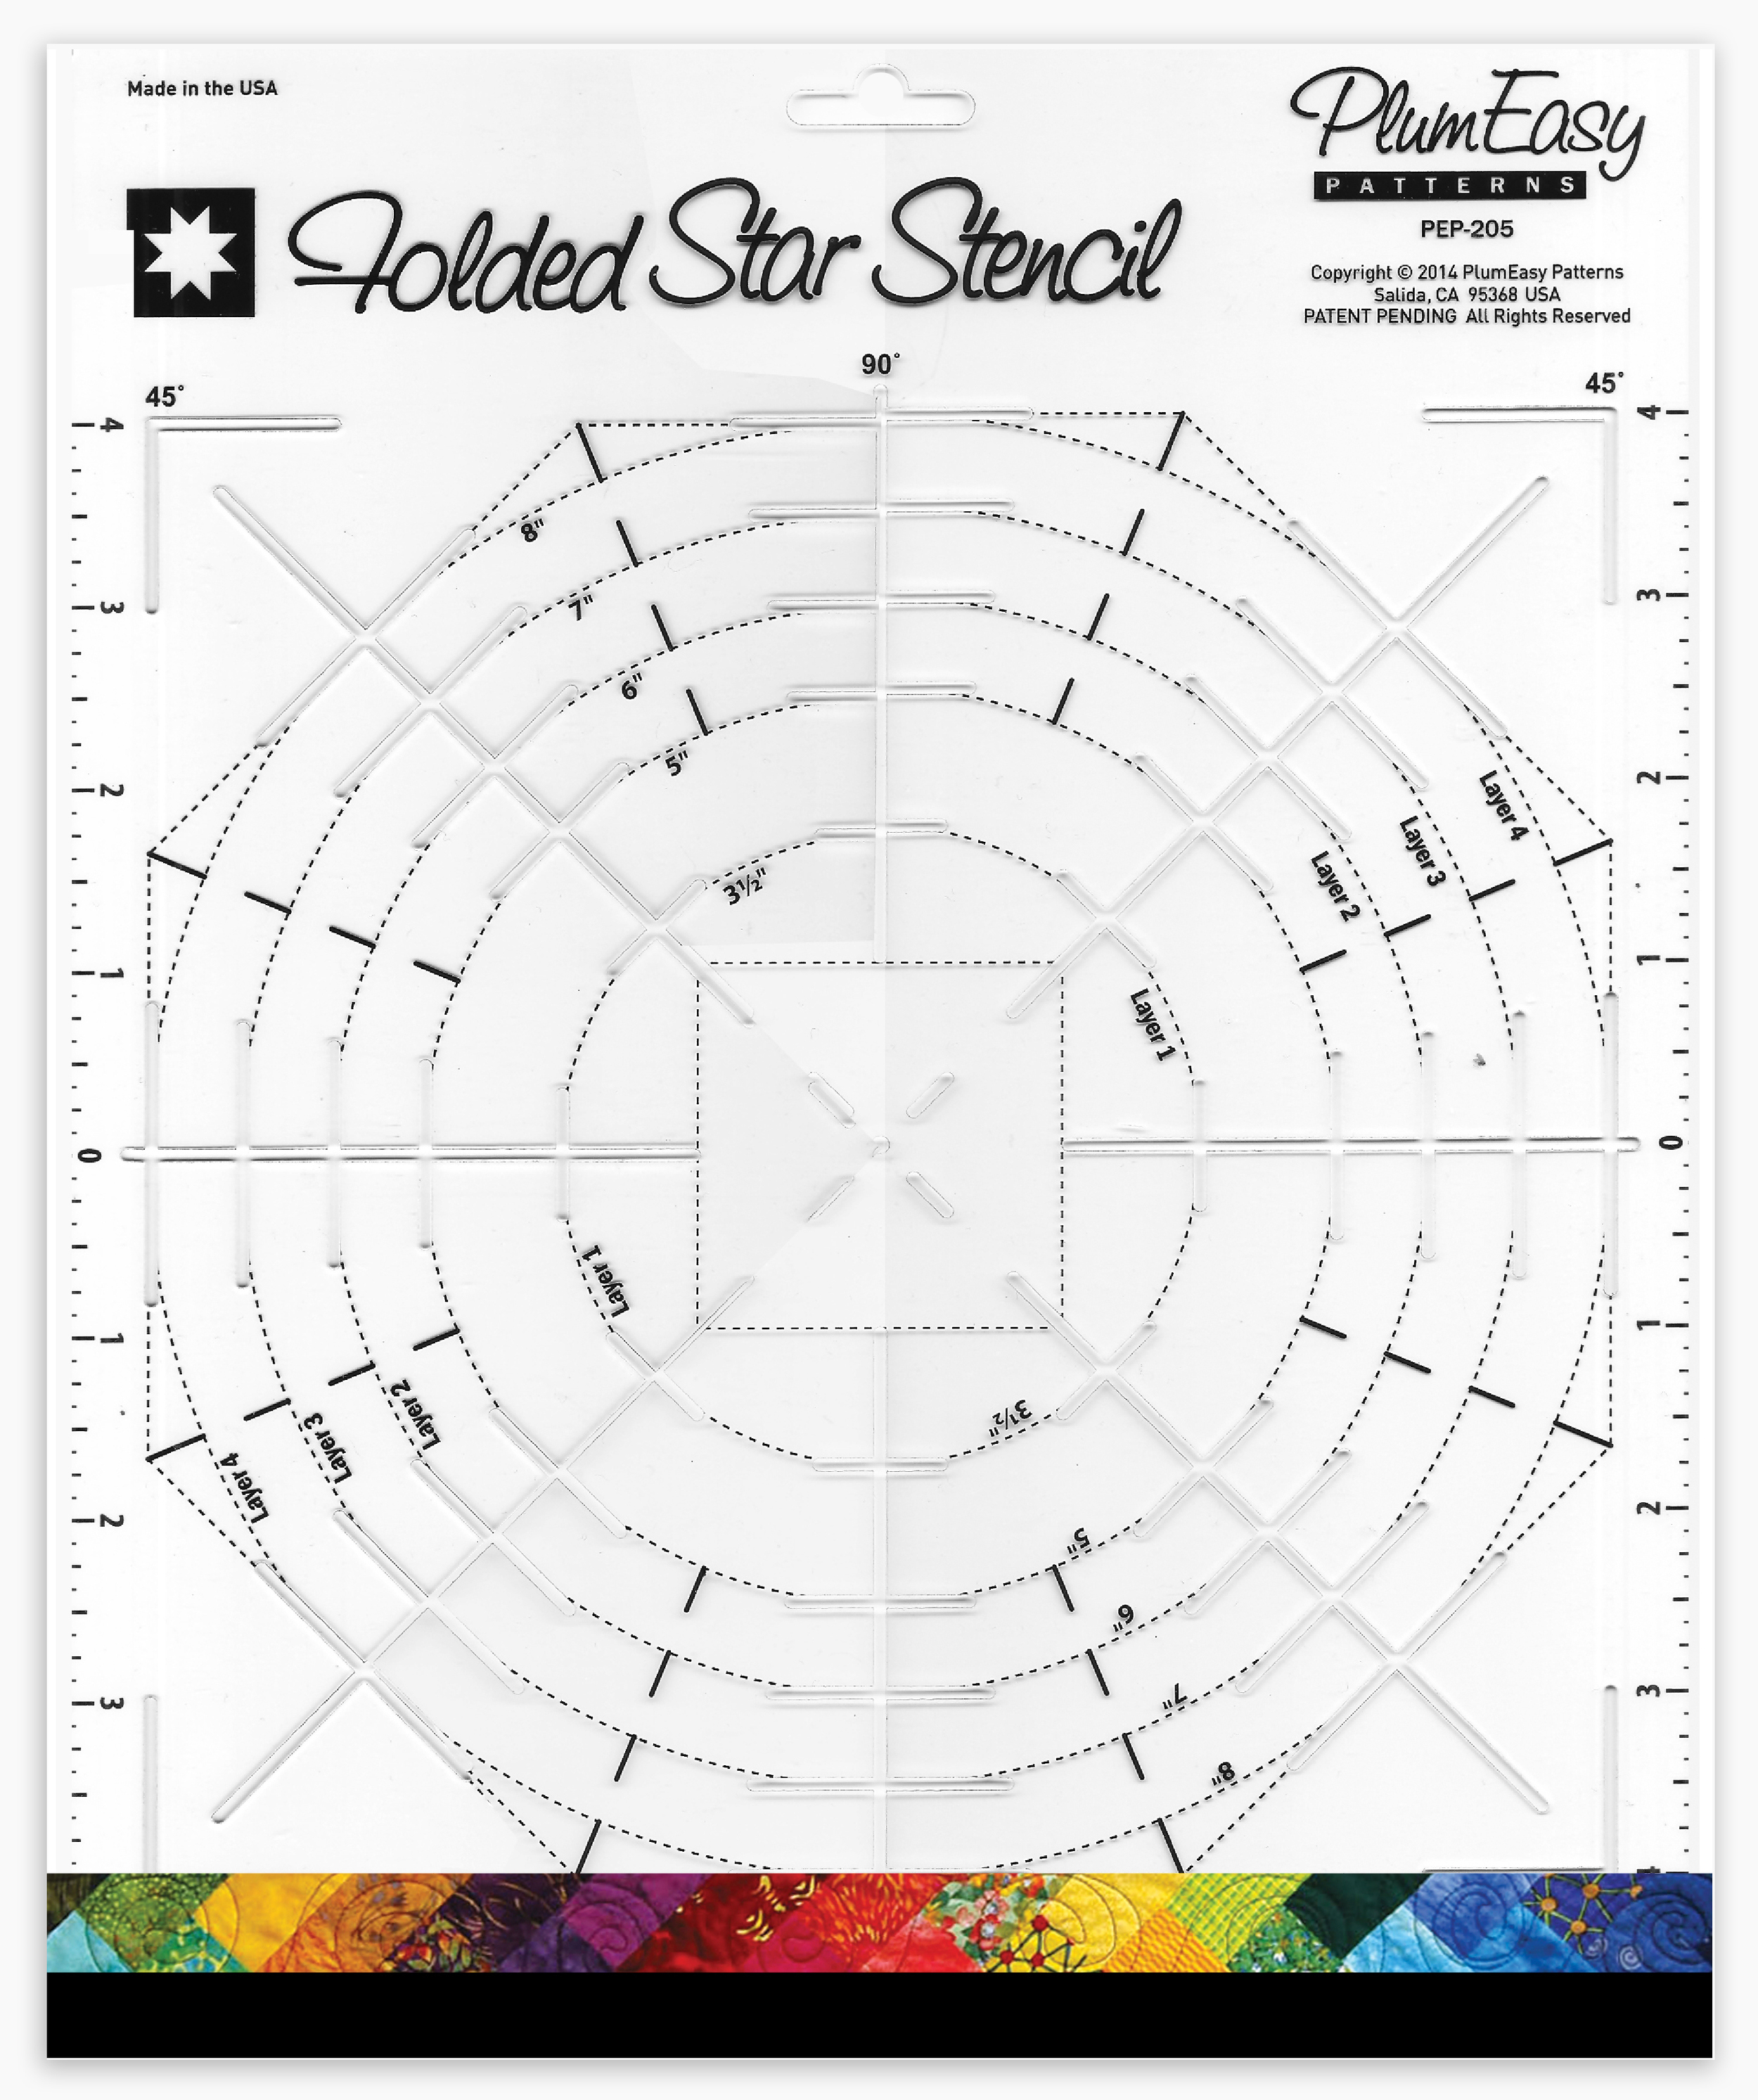 PlumEasy Patterns Transparent Foundation Blank 25 Sheets